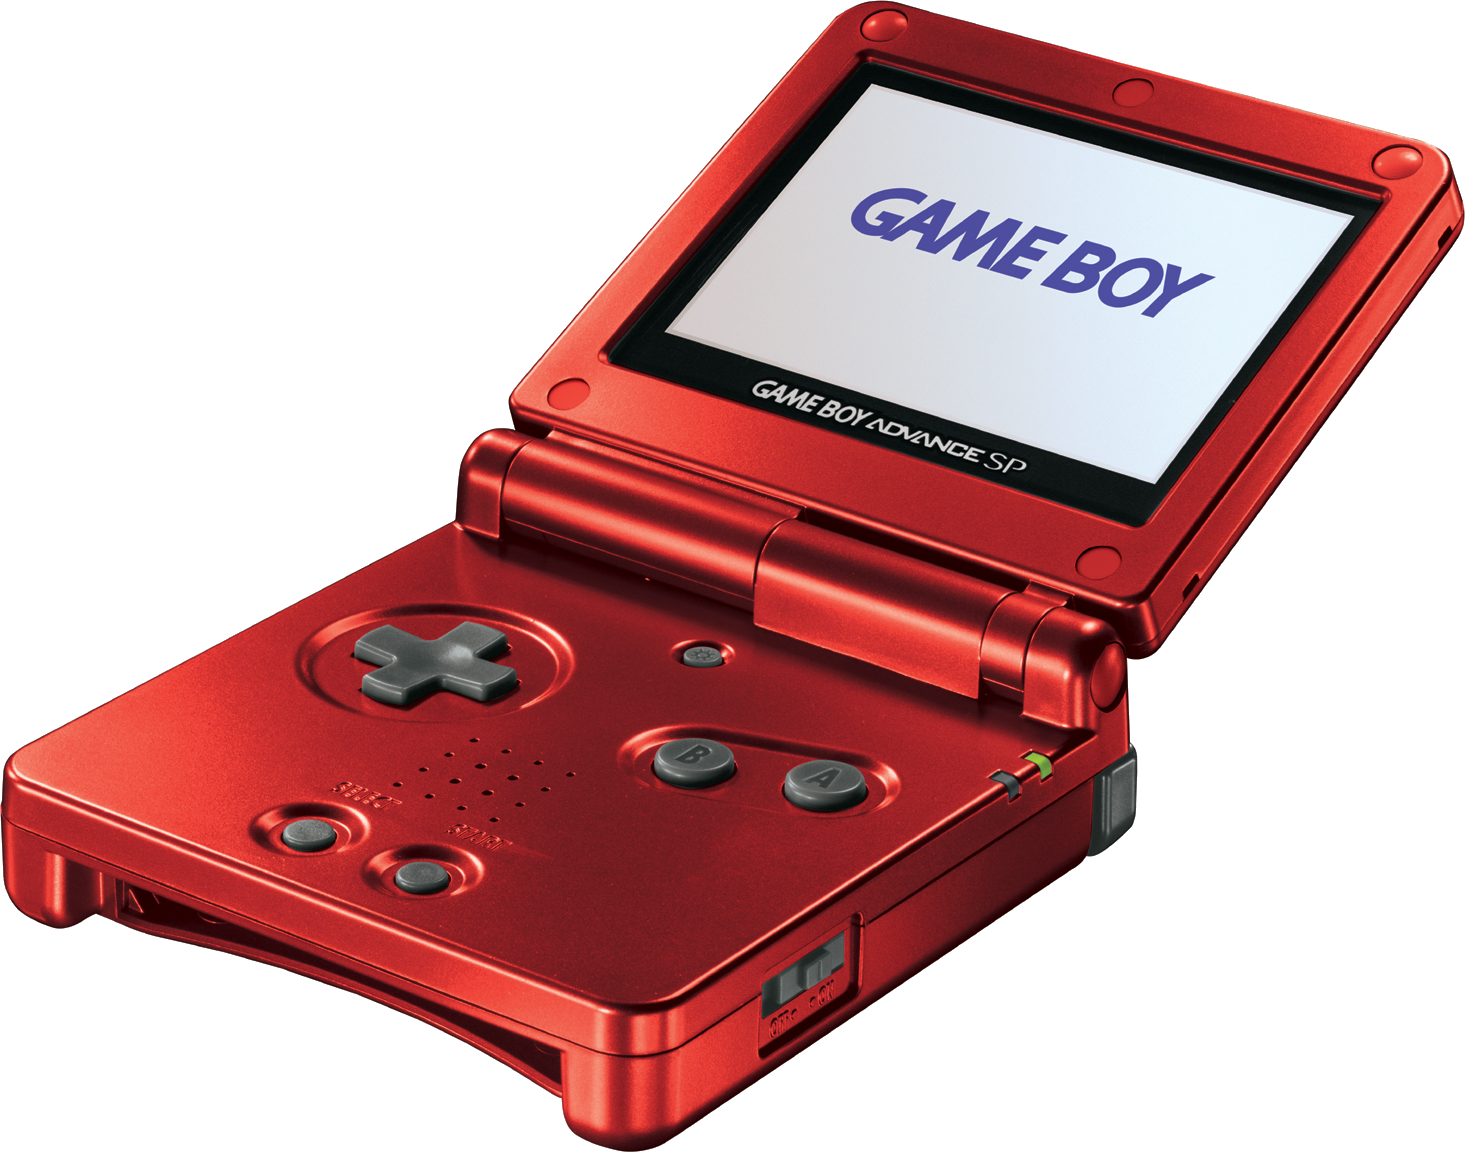 Gba Sp